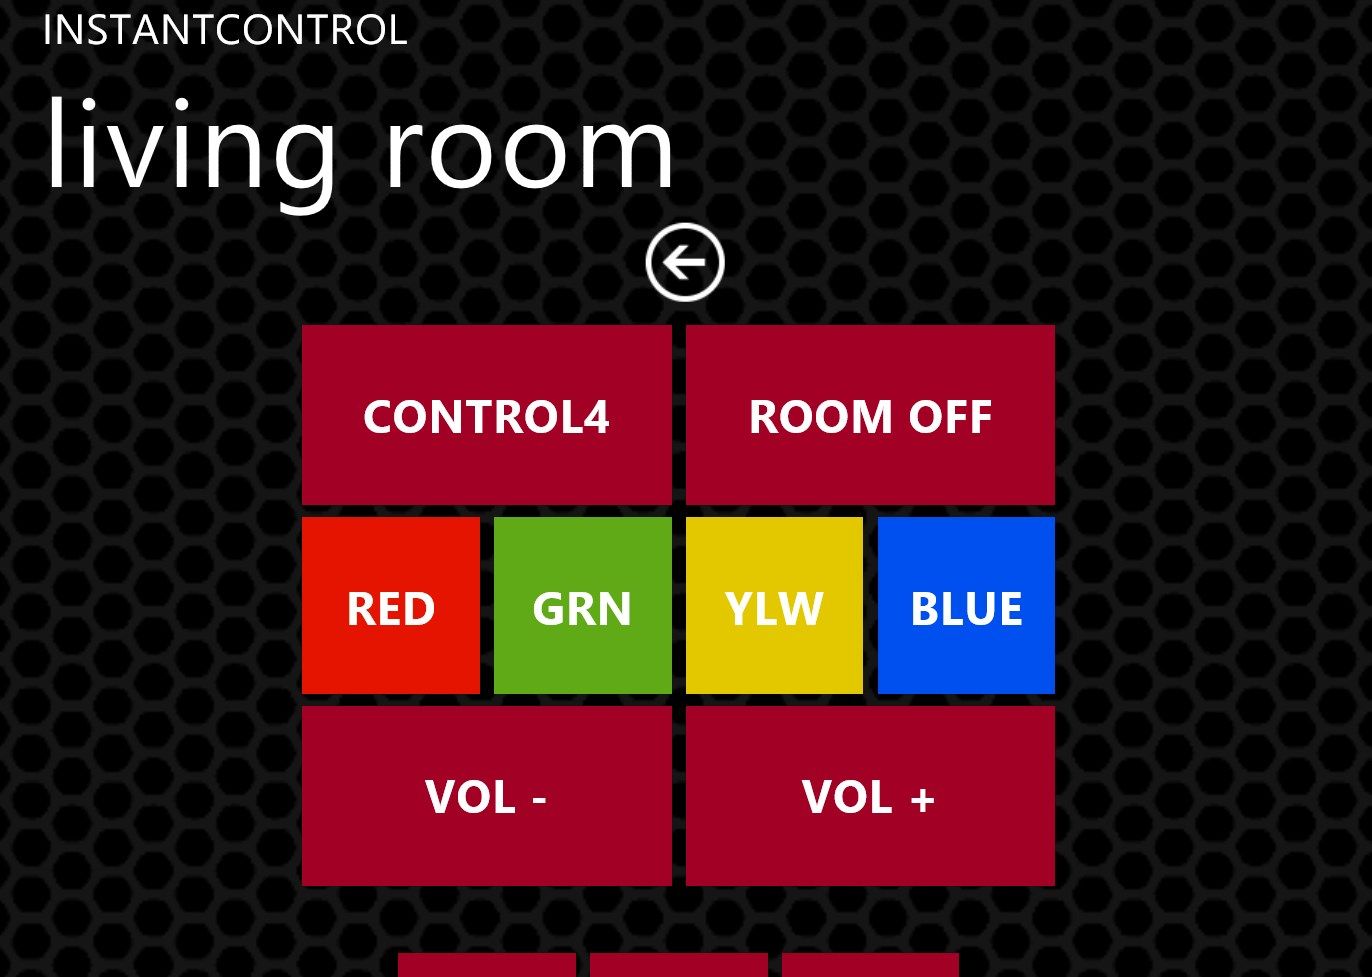 Familiar Control4 remote control with colored program buttons!